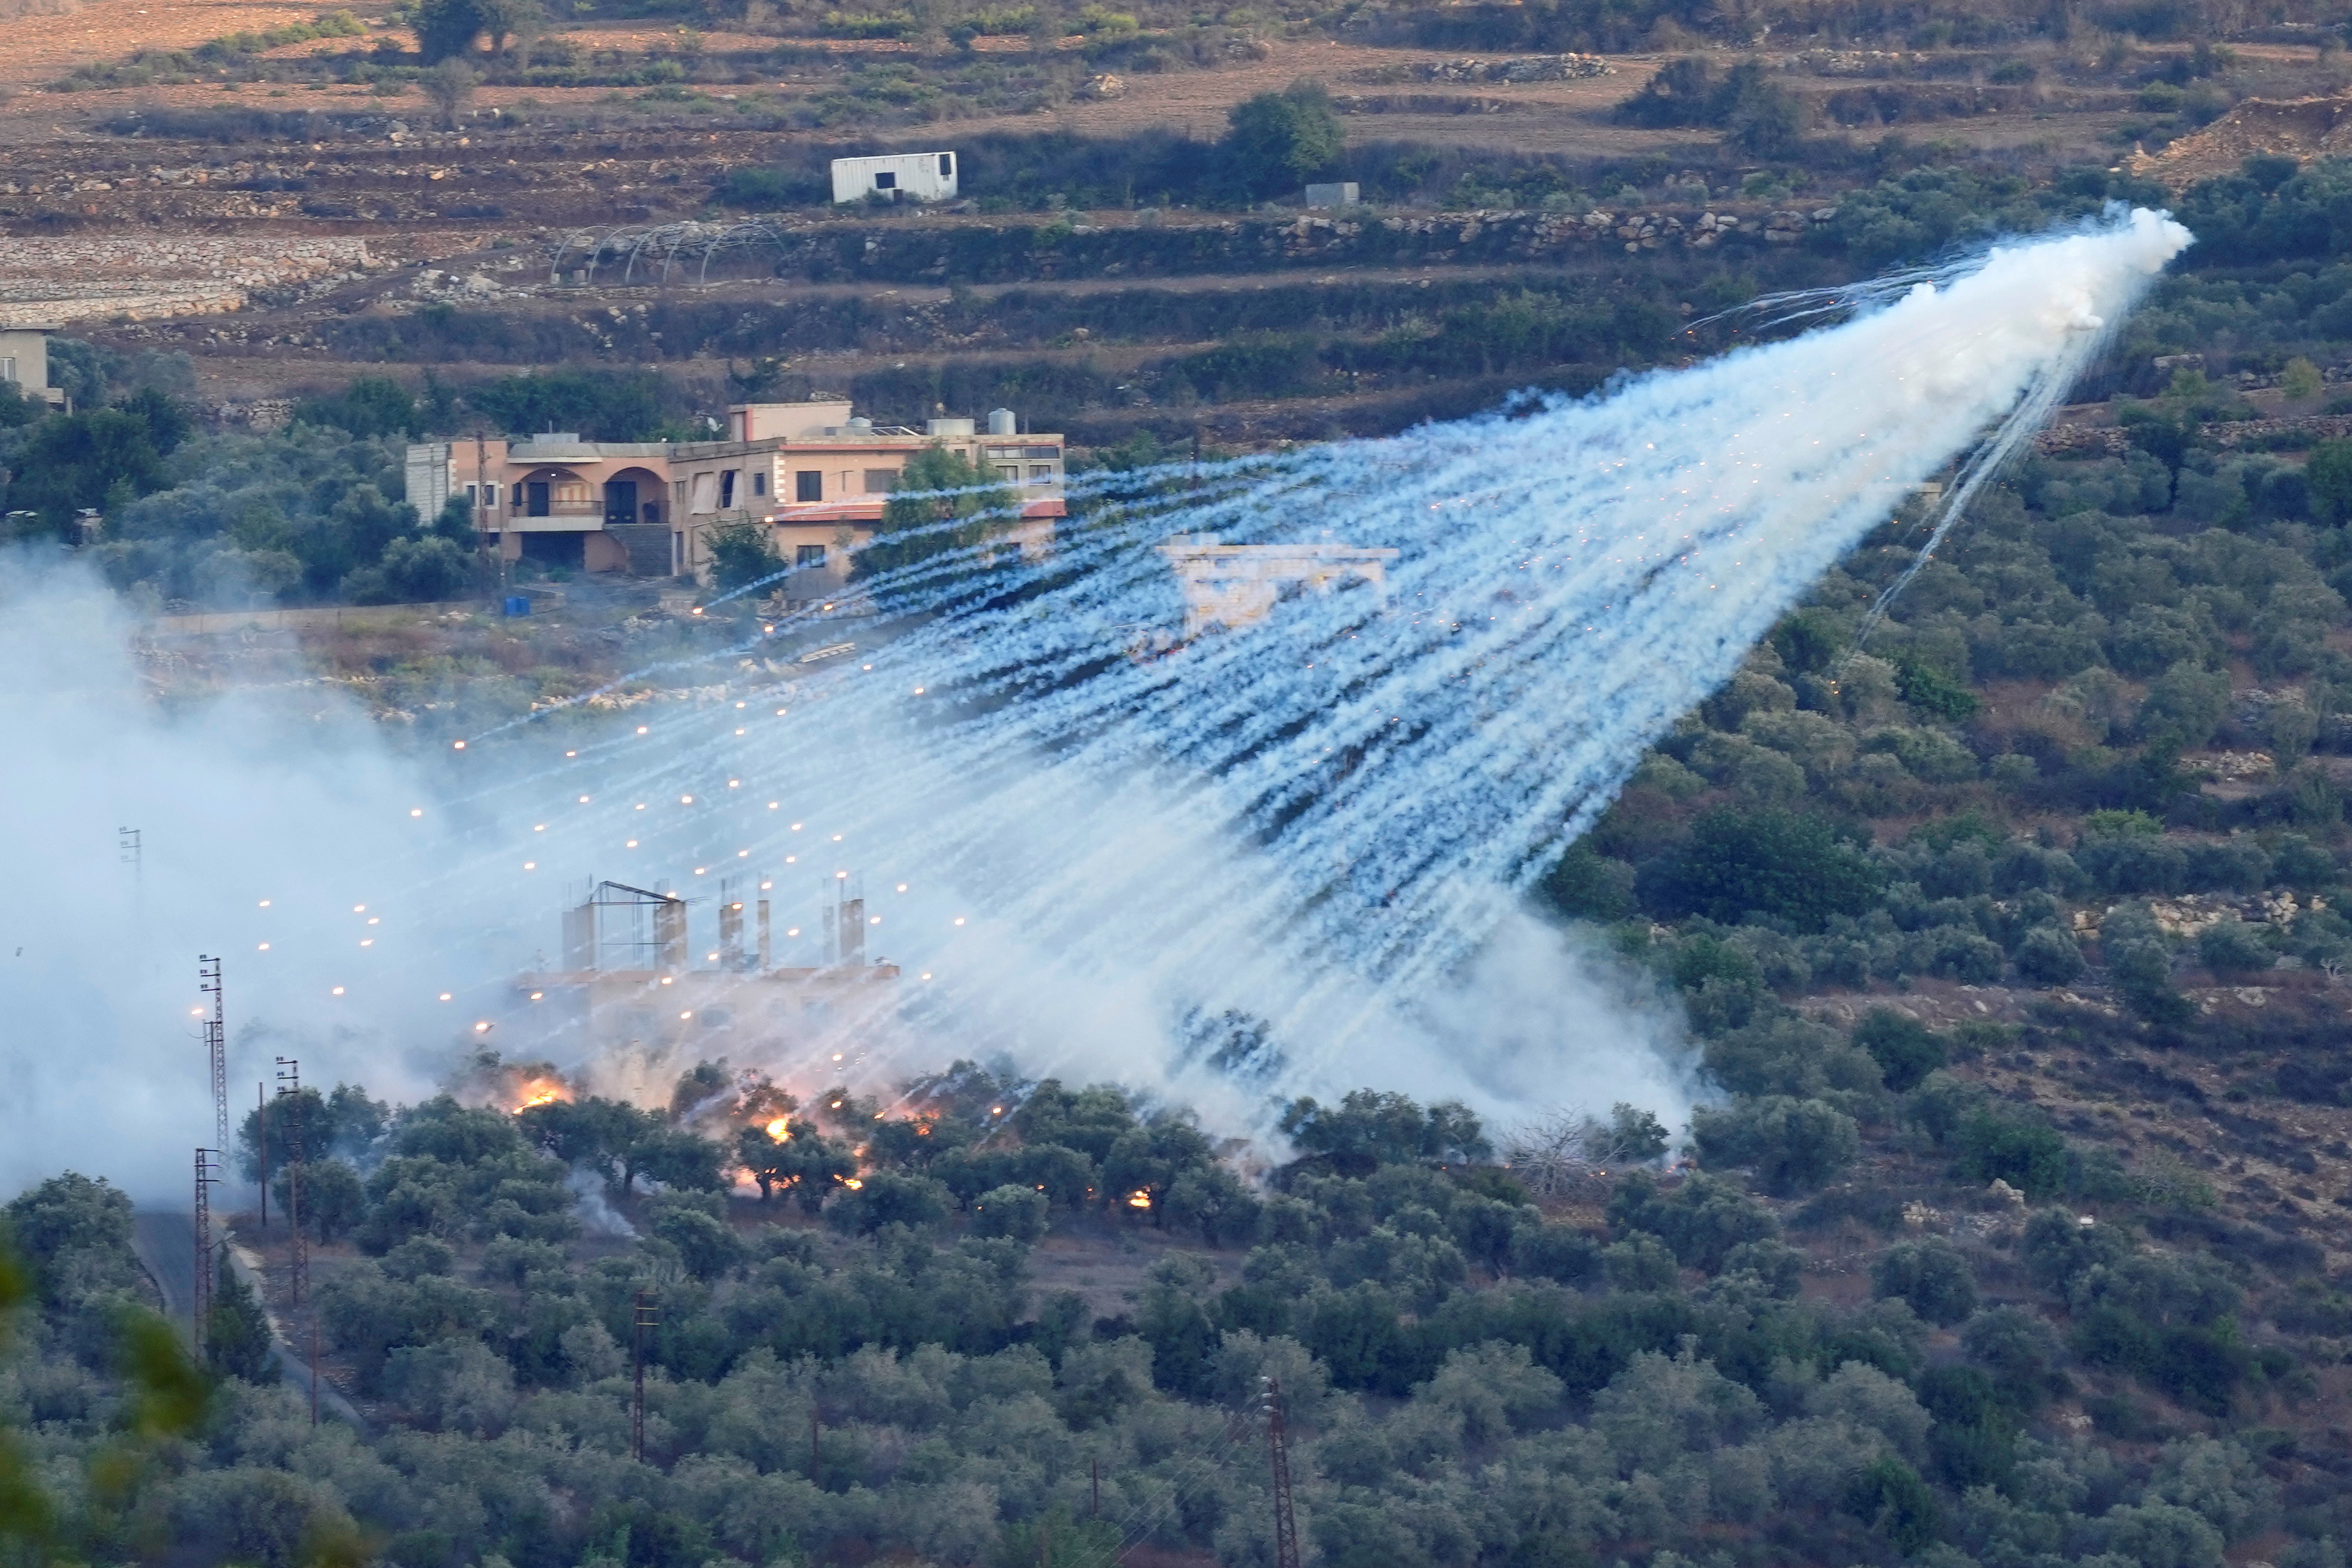 The human rights group Amnesty International said Tuesday Oct. 31, 2023 that civilians in southern Lebanon were injured earlier this month when Israeli forces hit a border village with shells containing white phosphorus, a controversial incendiary munition.